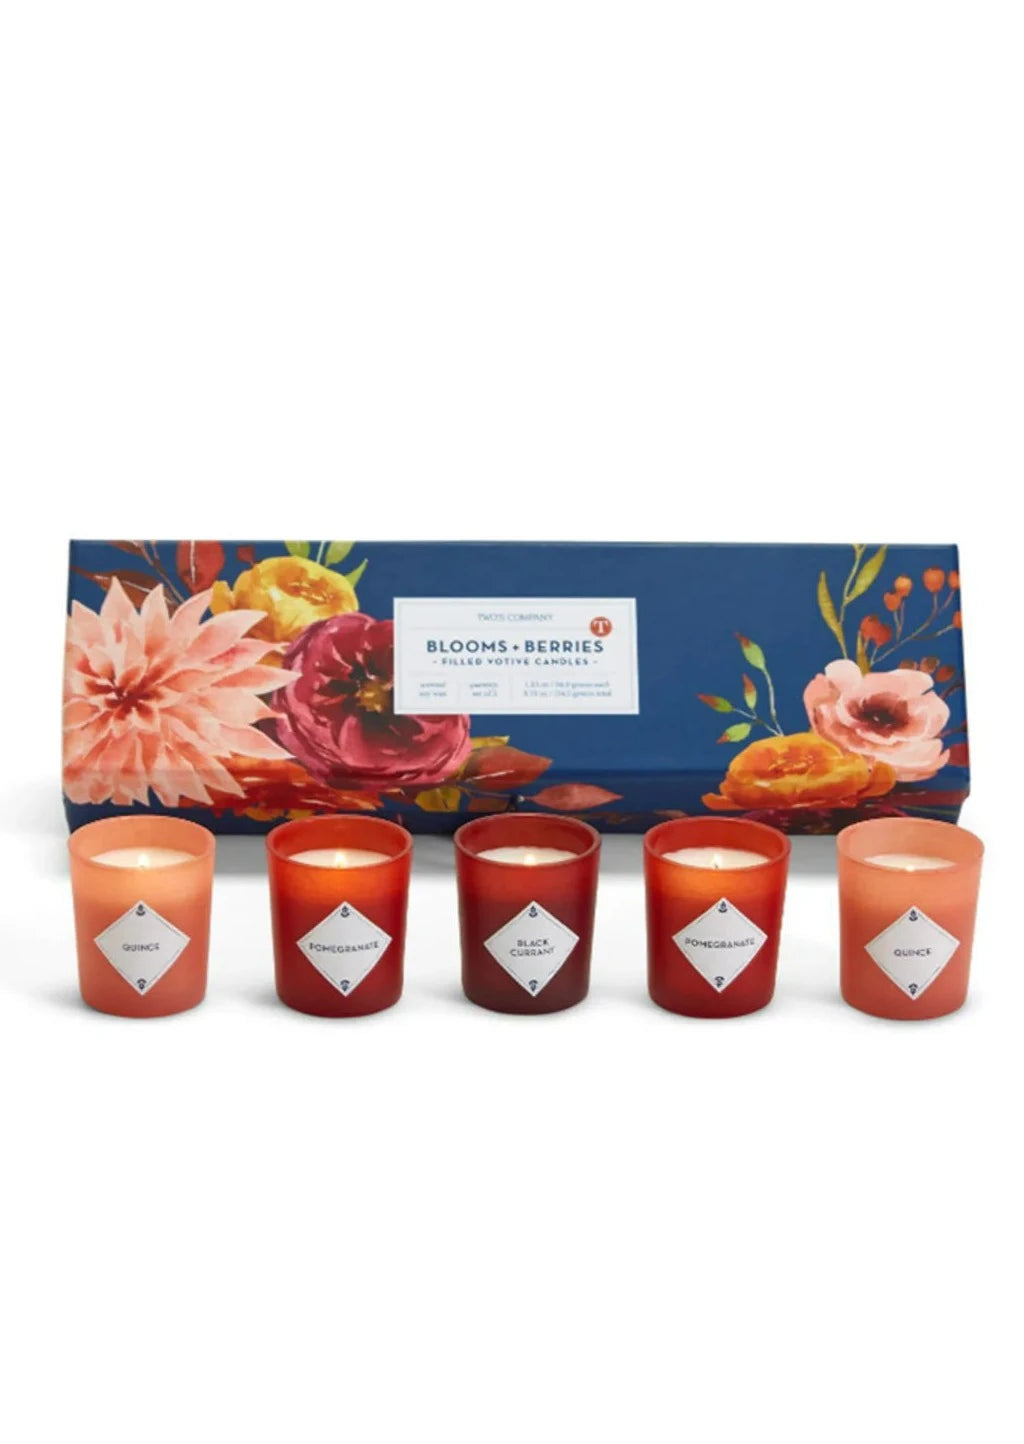 Blooms and Berries Scented Candles